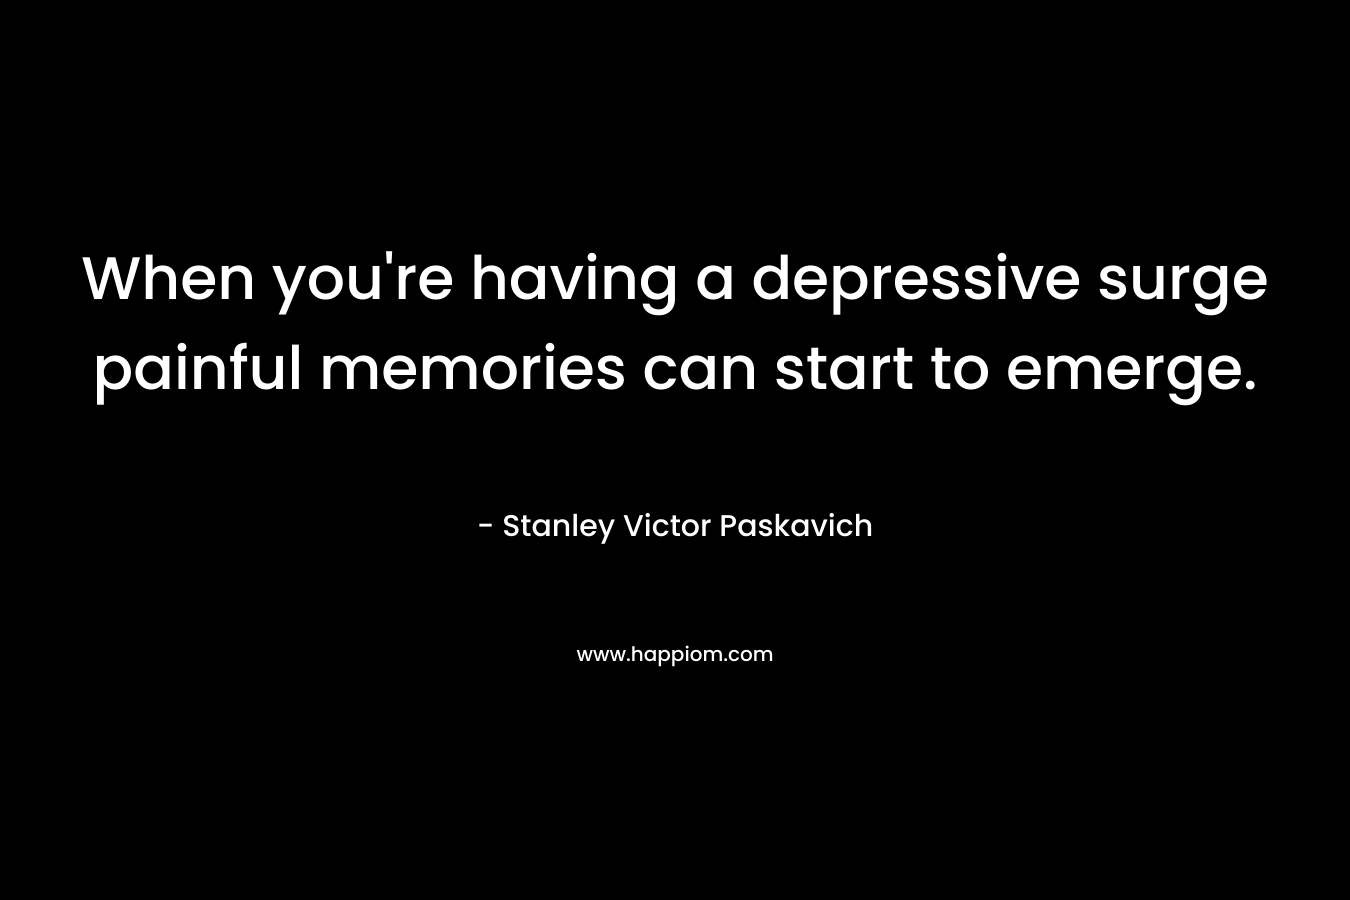 When you’re having a depressive surge painful memories can start to emerge. – Stanley Victor Paskavich